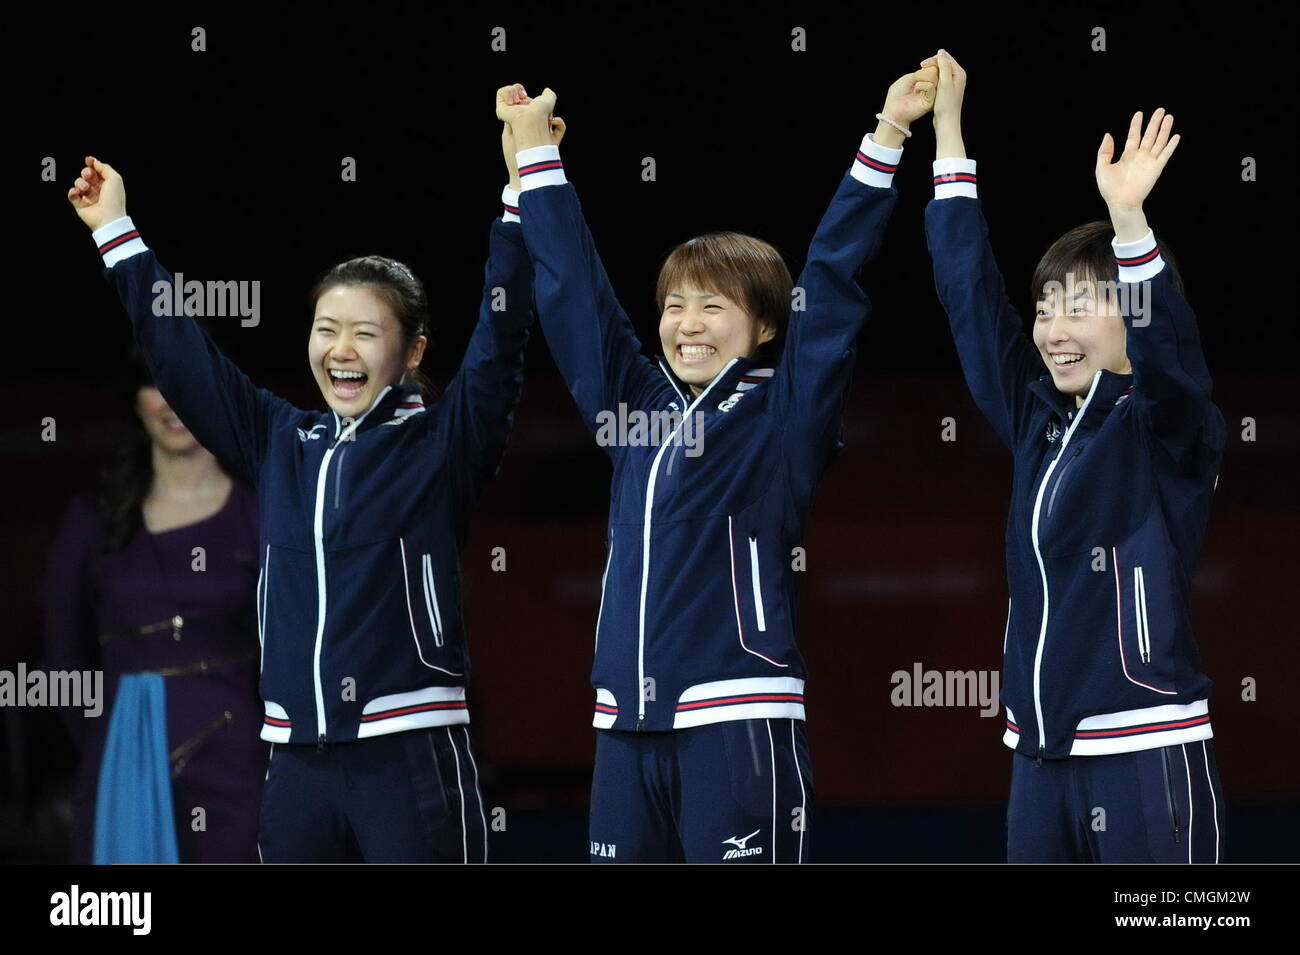 07.08.2012.  London, ENGLAND; (L-R) Silver medalists Ai Fukuhara, Sayaka Hirano and Kasumi Ishikawa of Japan celebrate on the podium during the medal ceremony for the Women's Team Table Tennis on Day 11 of the London 2012 Olympic Games at ExCeL. Stock Photo